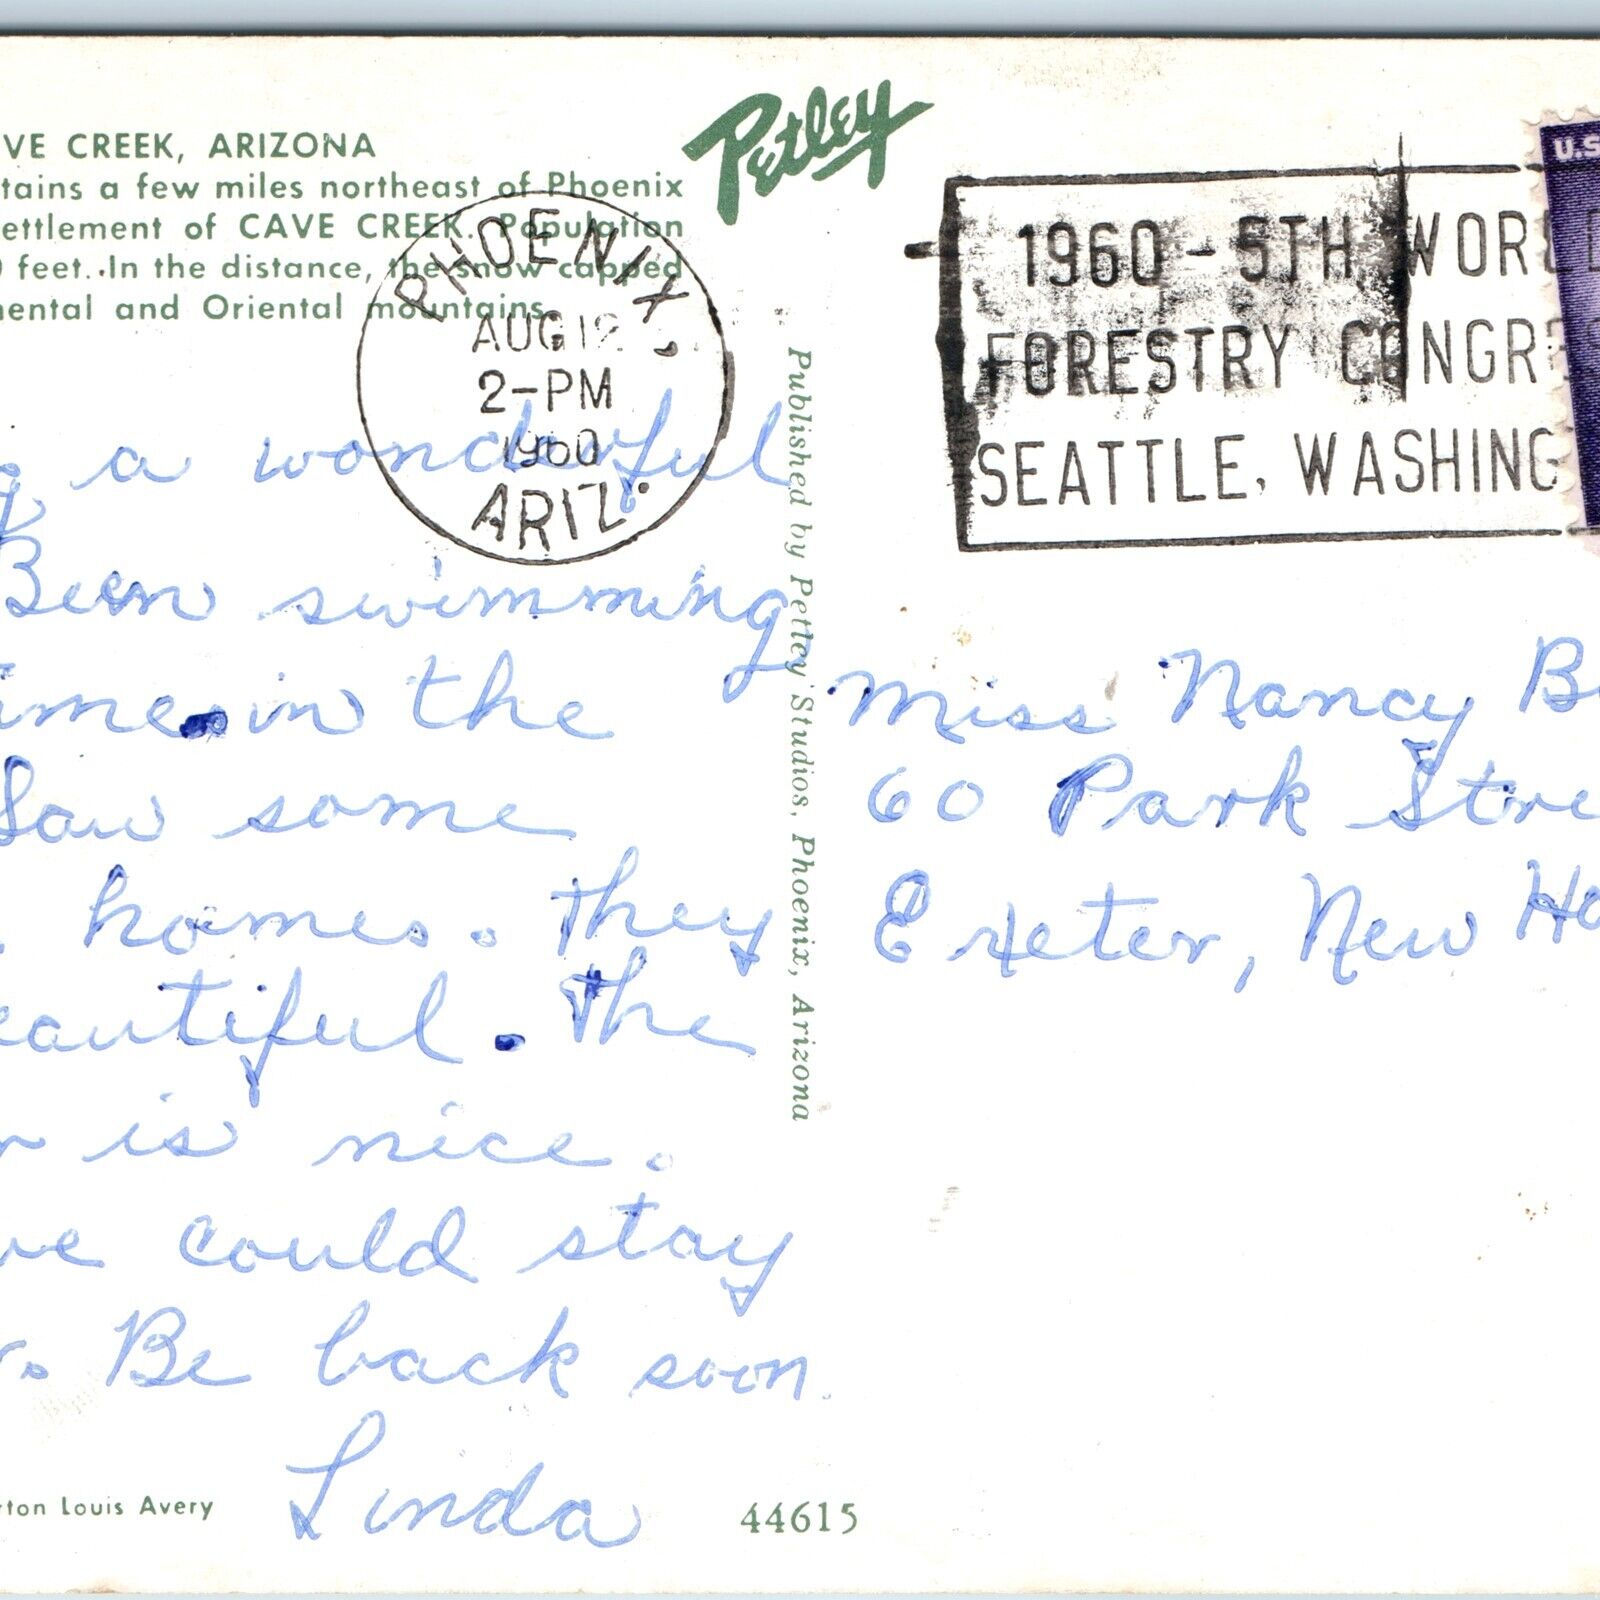 1960 Seattle, Wash. 5th World Foresty Congress Cancel Postal Stamp Cover PC A230